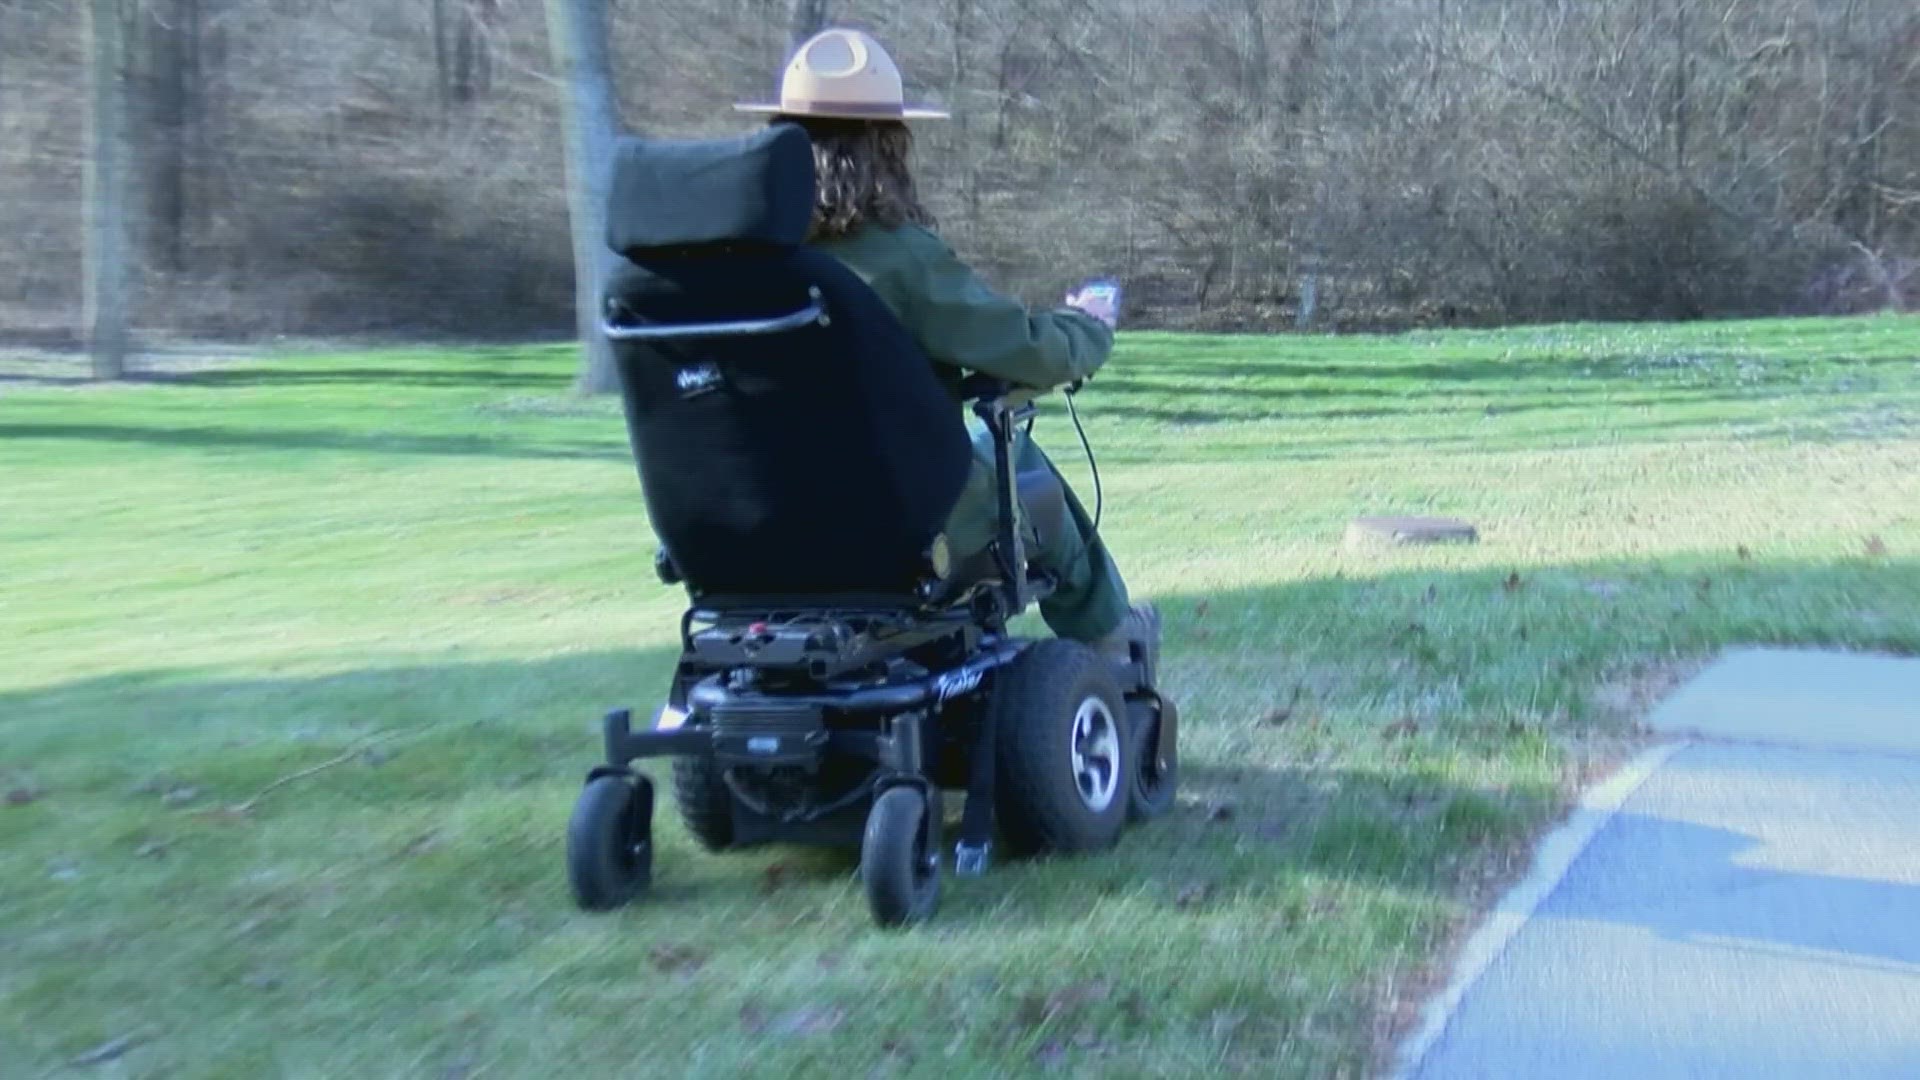 The grants are paying for all-terrain wheelchairs